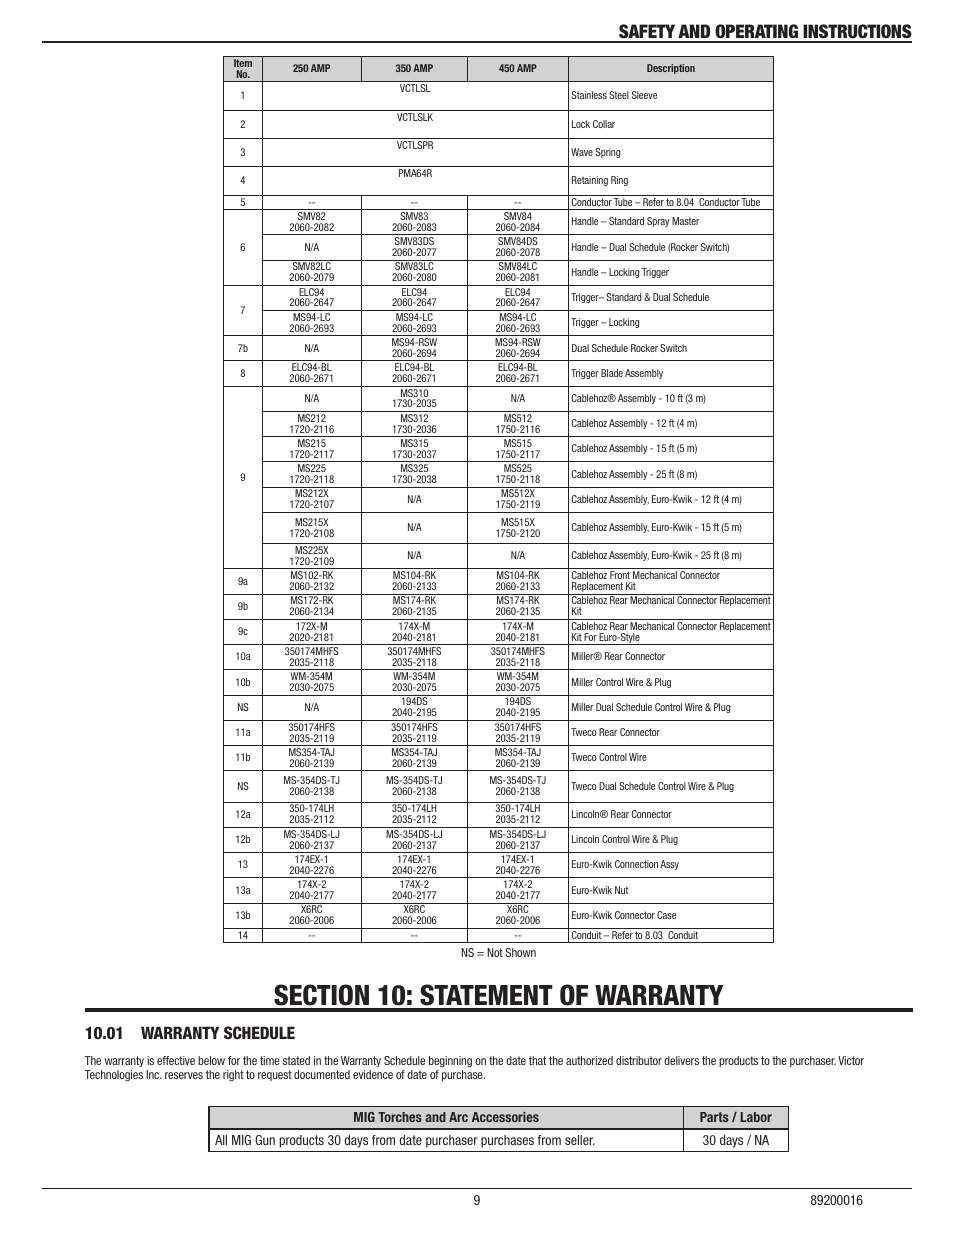 Section 10: statement of warranty, 01 warranty schedule, Safety and operating instructions | Tweco SprayMaster with Velocity Consumables MIG Gun User Manual | Page 11 / 12